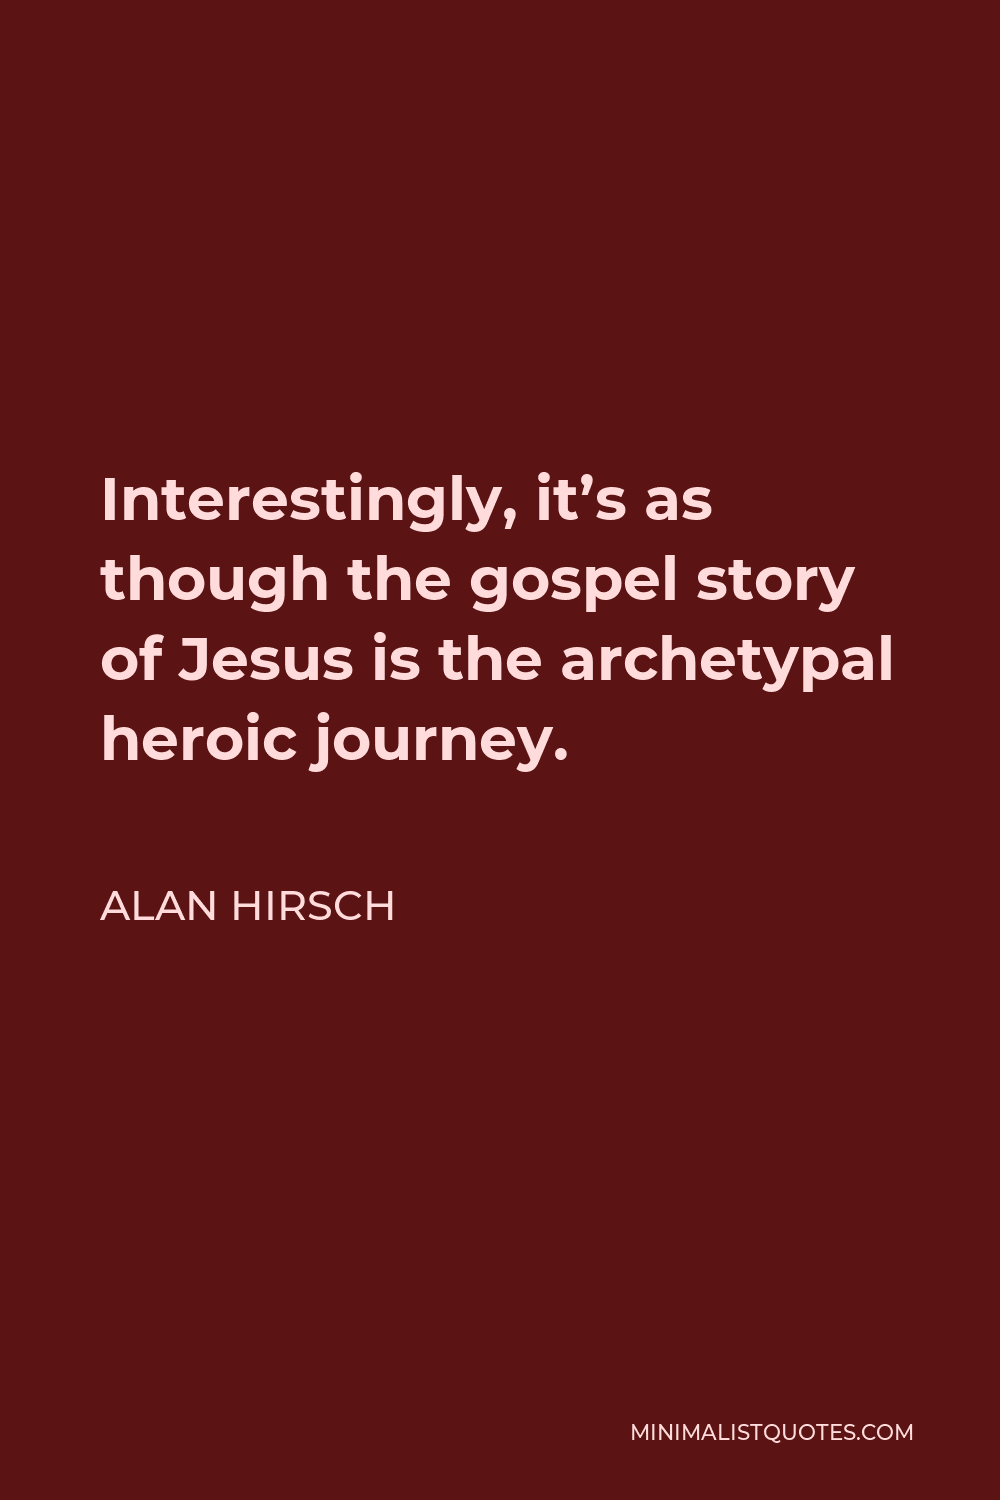 Alan Hirsch Quote - Interestingly, it’s as though the gospel story of Jesus is the archetypal heroic journey.